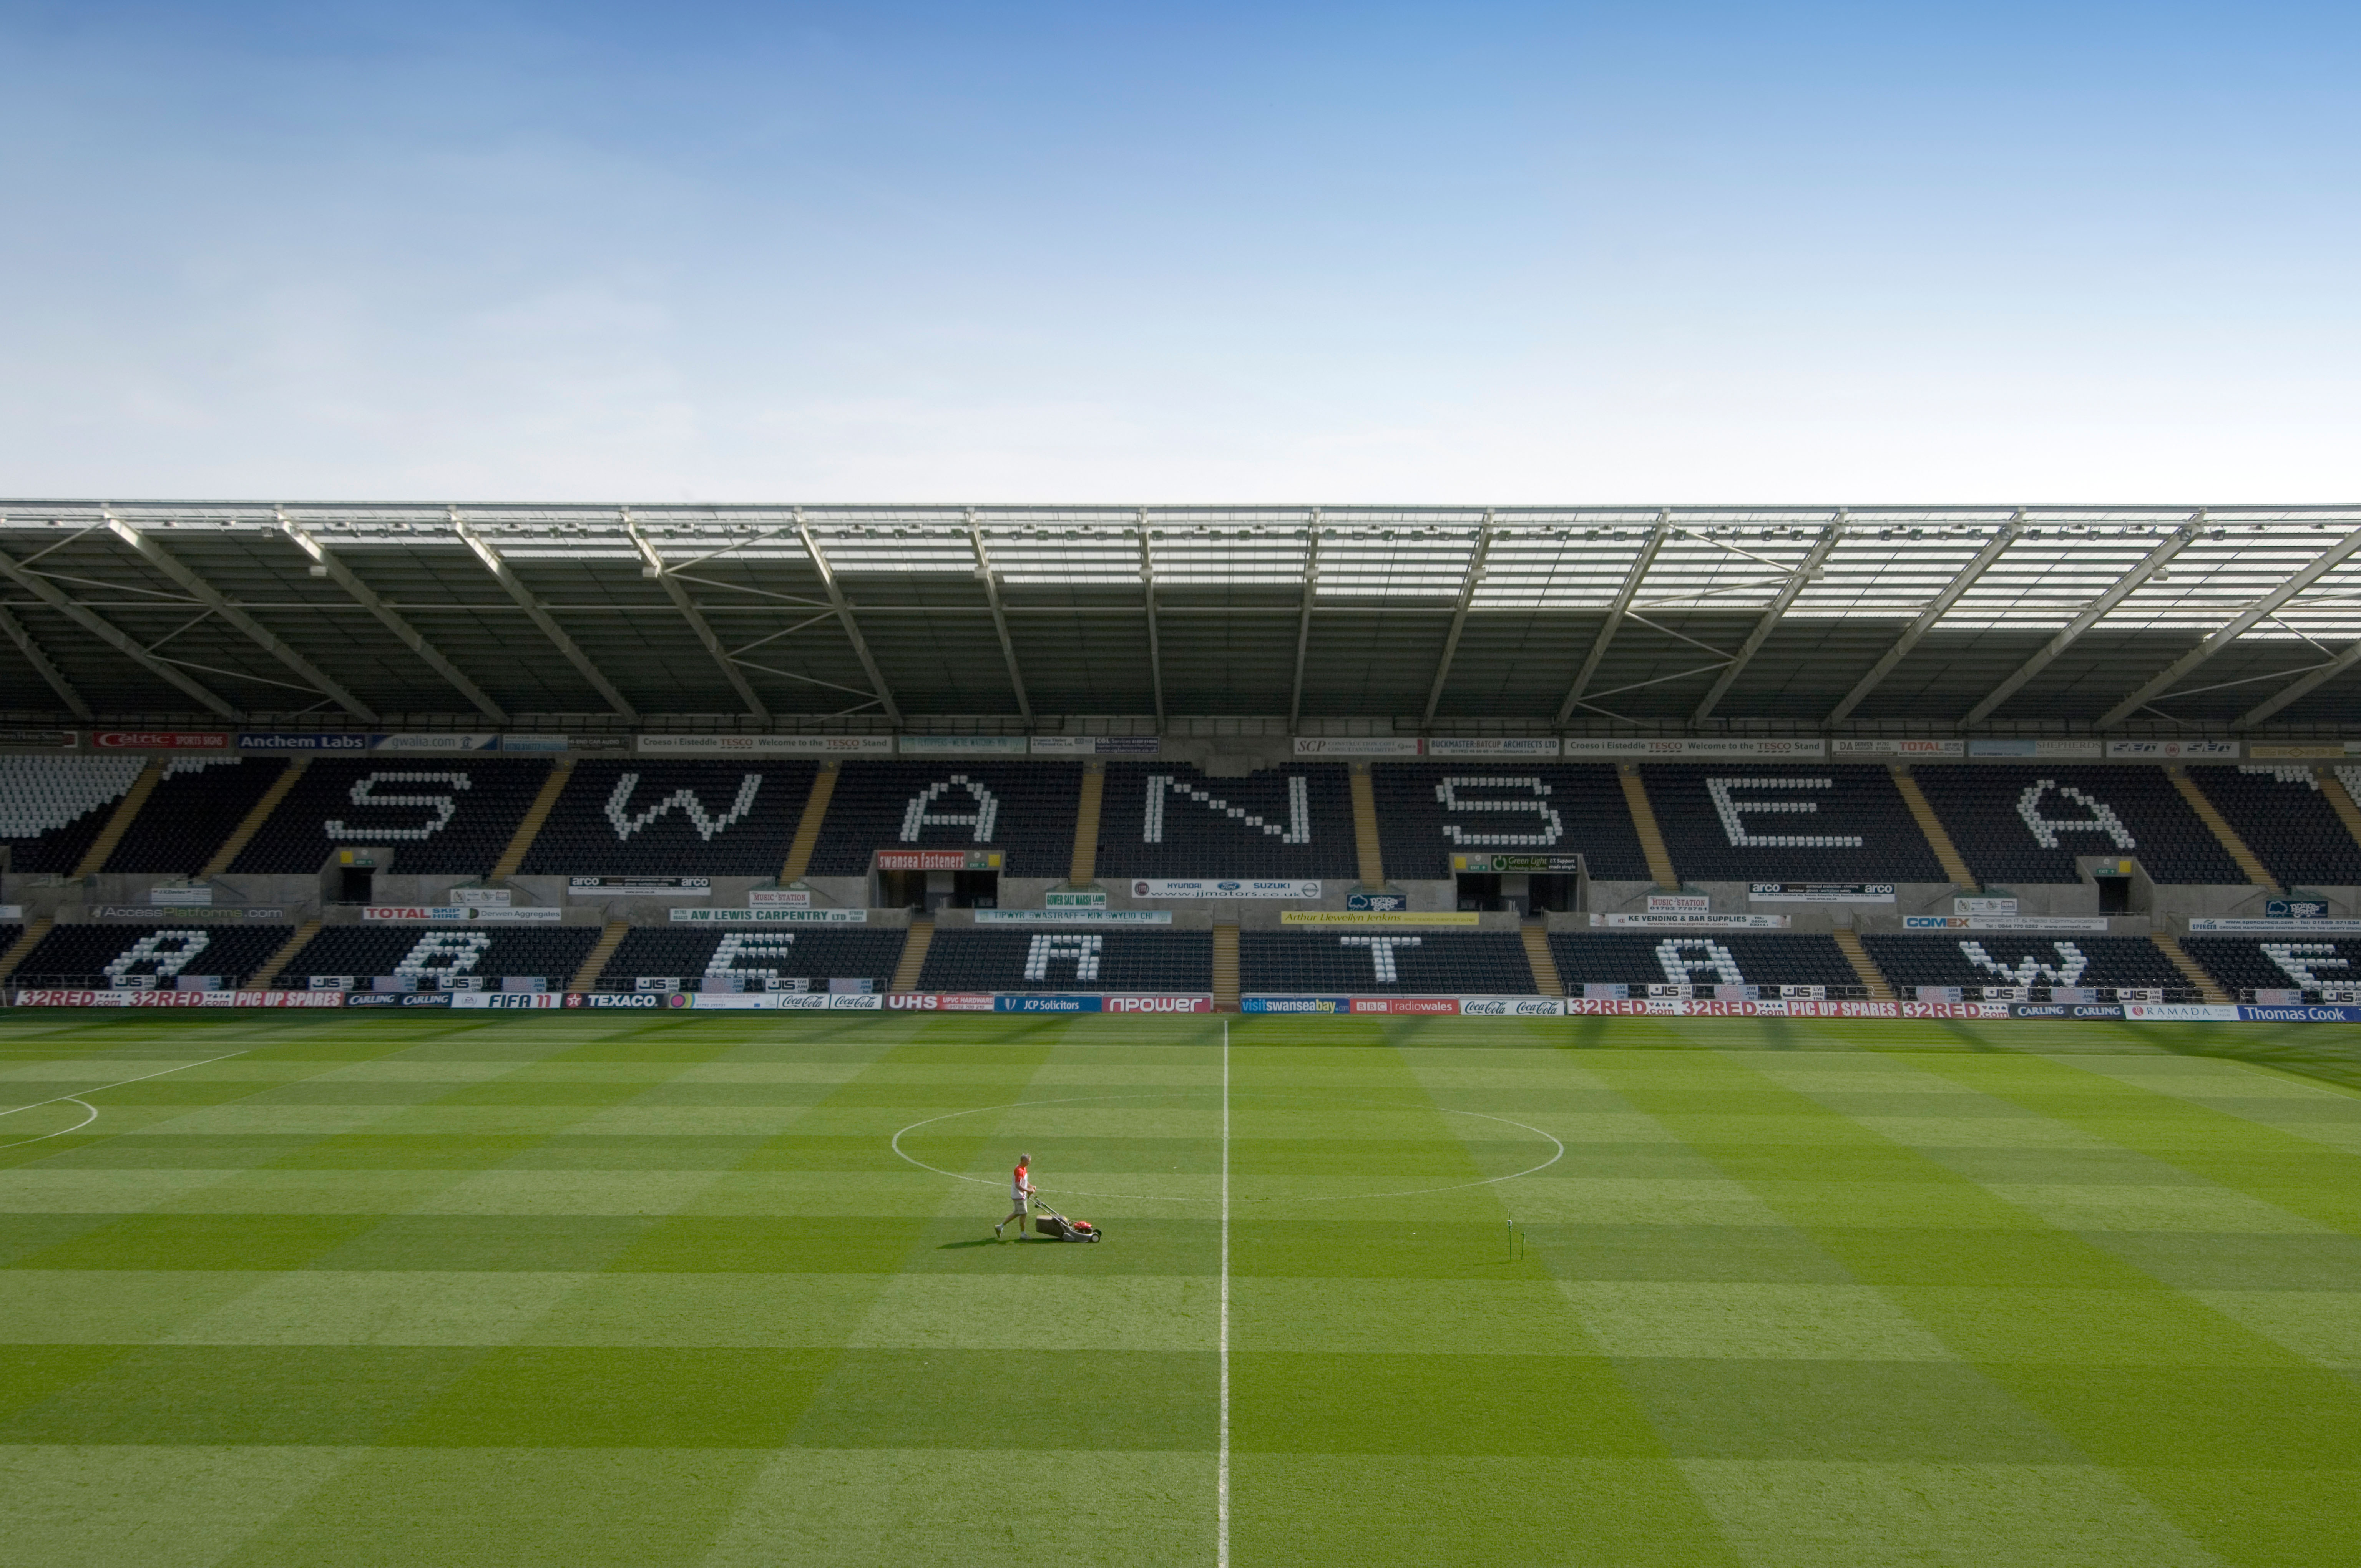 Swansea City vs Bristol City betting tips: Championship preview, predictions and odds